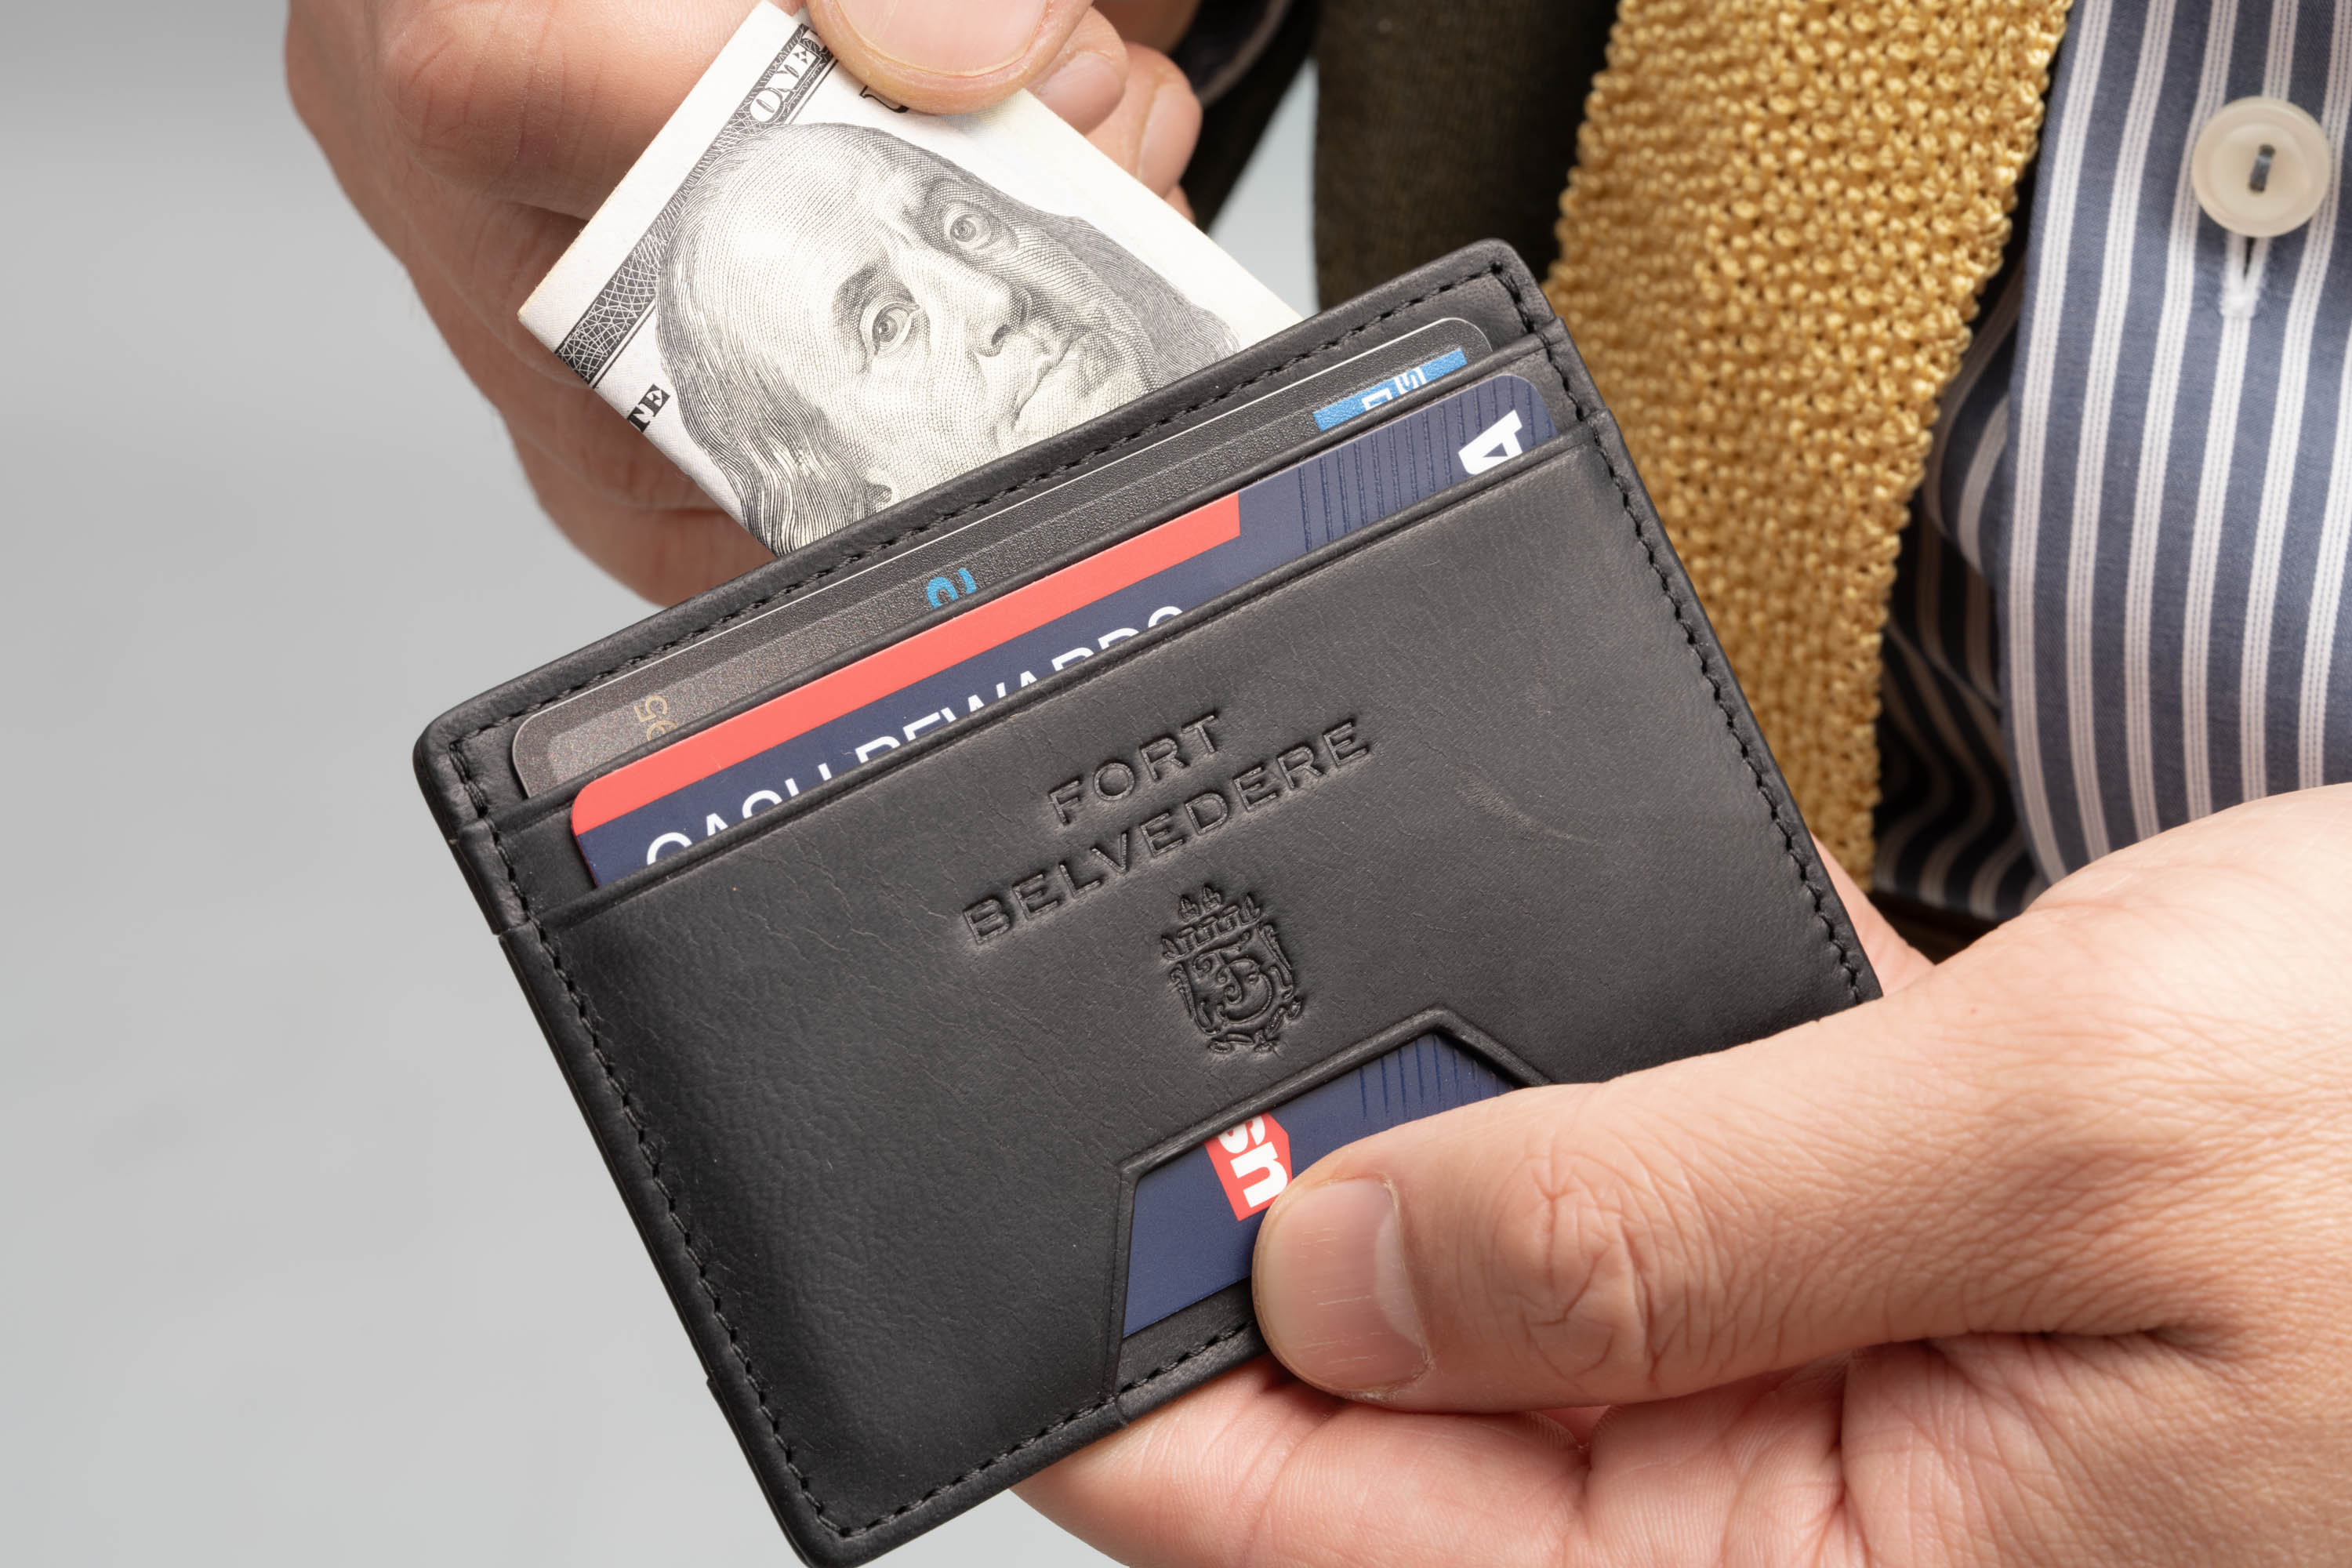 Slim Wallet - 4CC - Americana Black Full-Grain Leather paper bill and credit card compartments. 